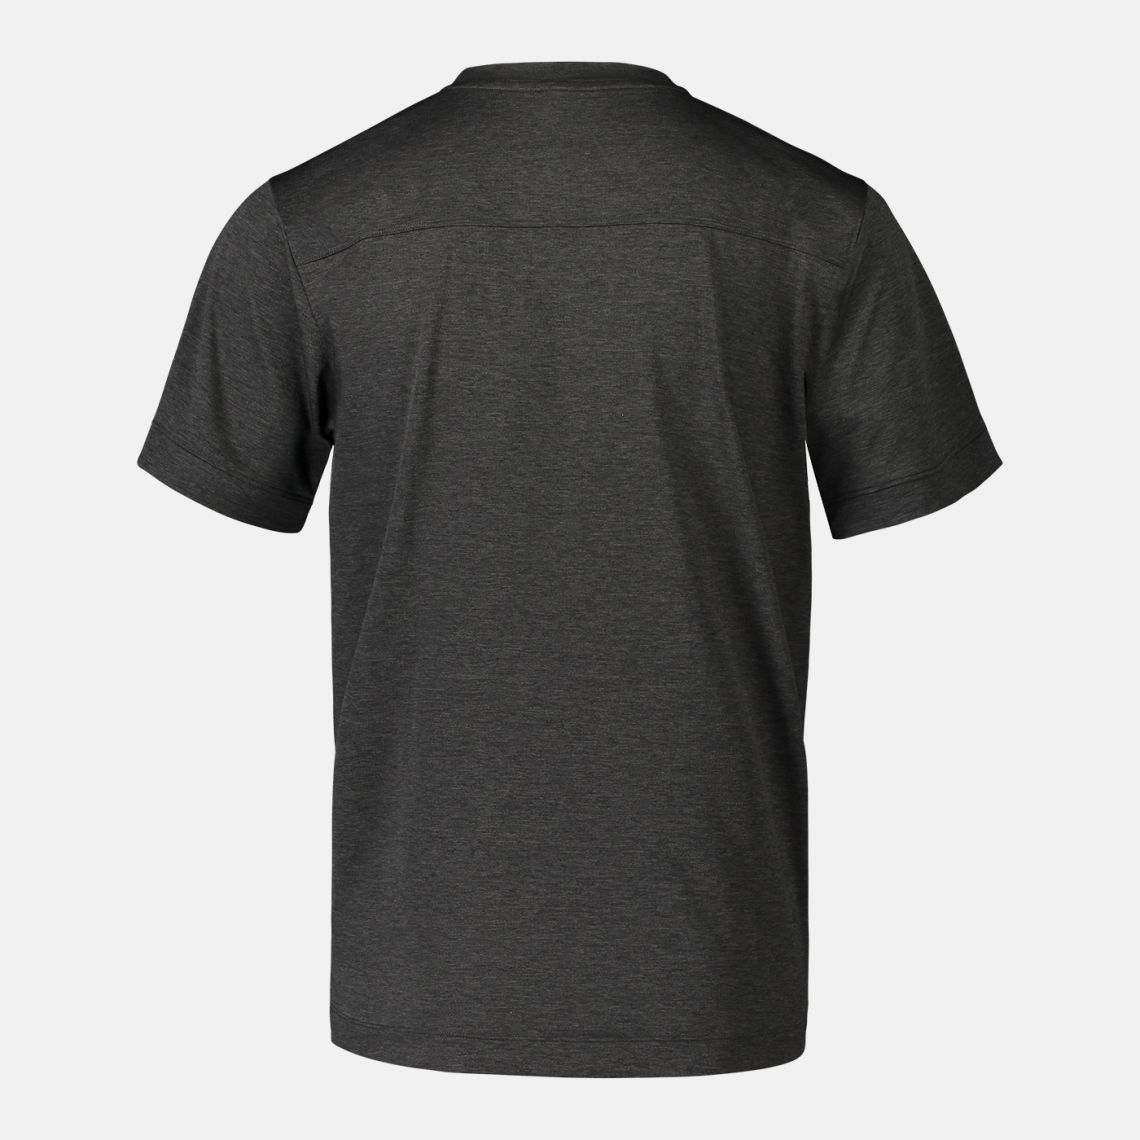 Grey t-shirt with high moisture wicking ability